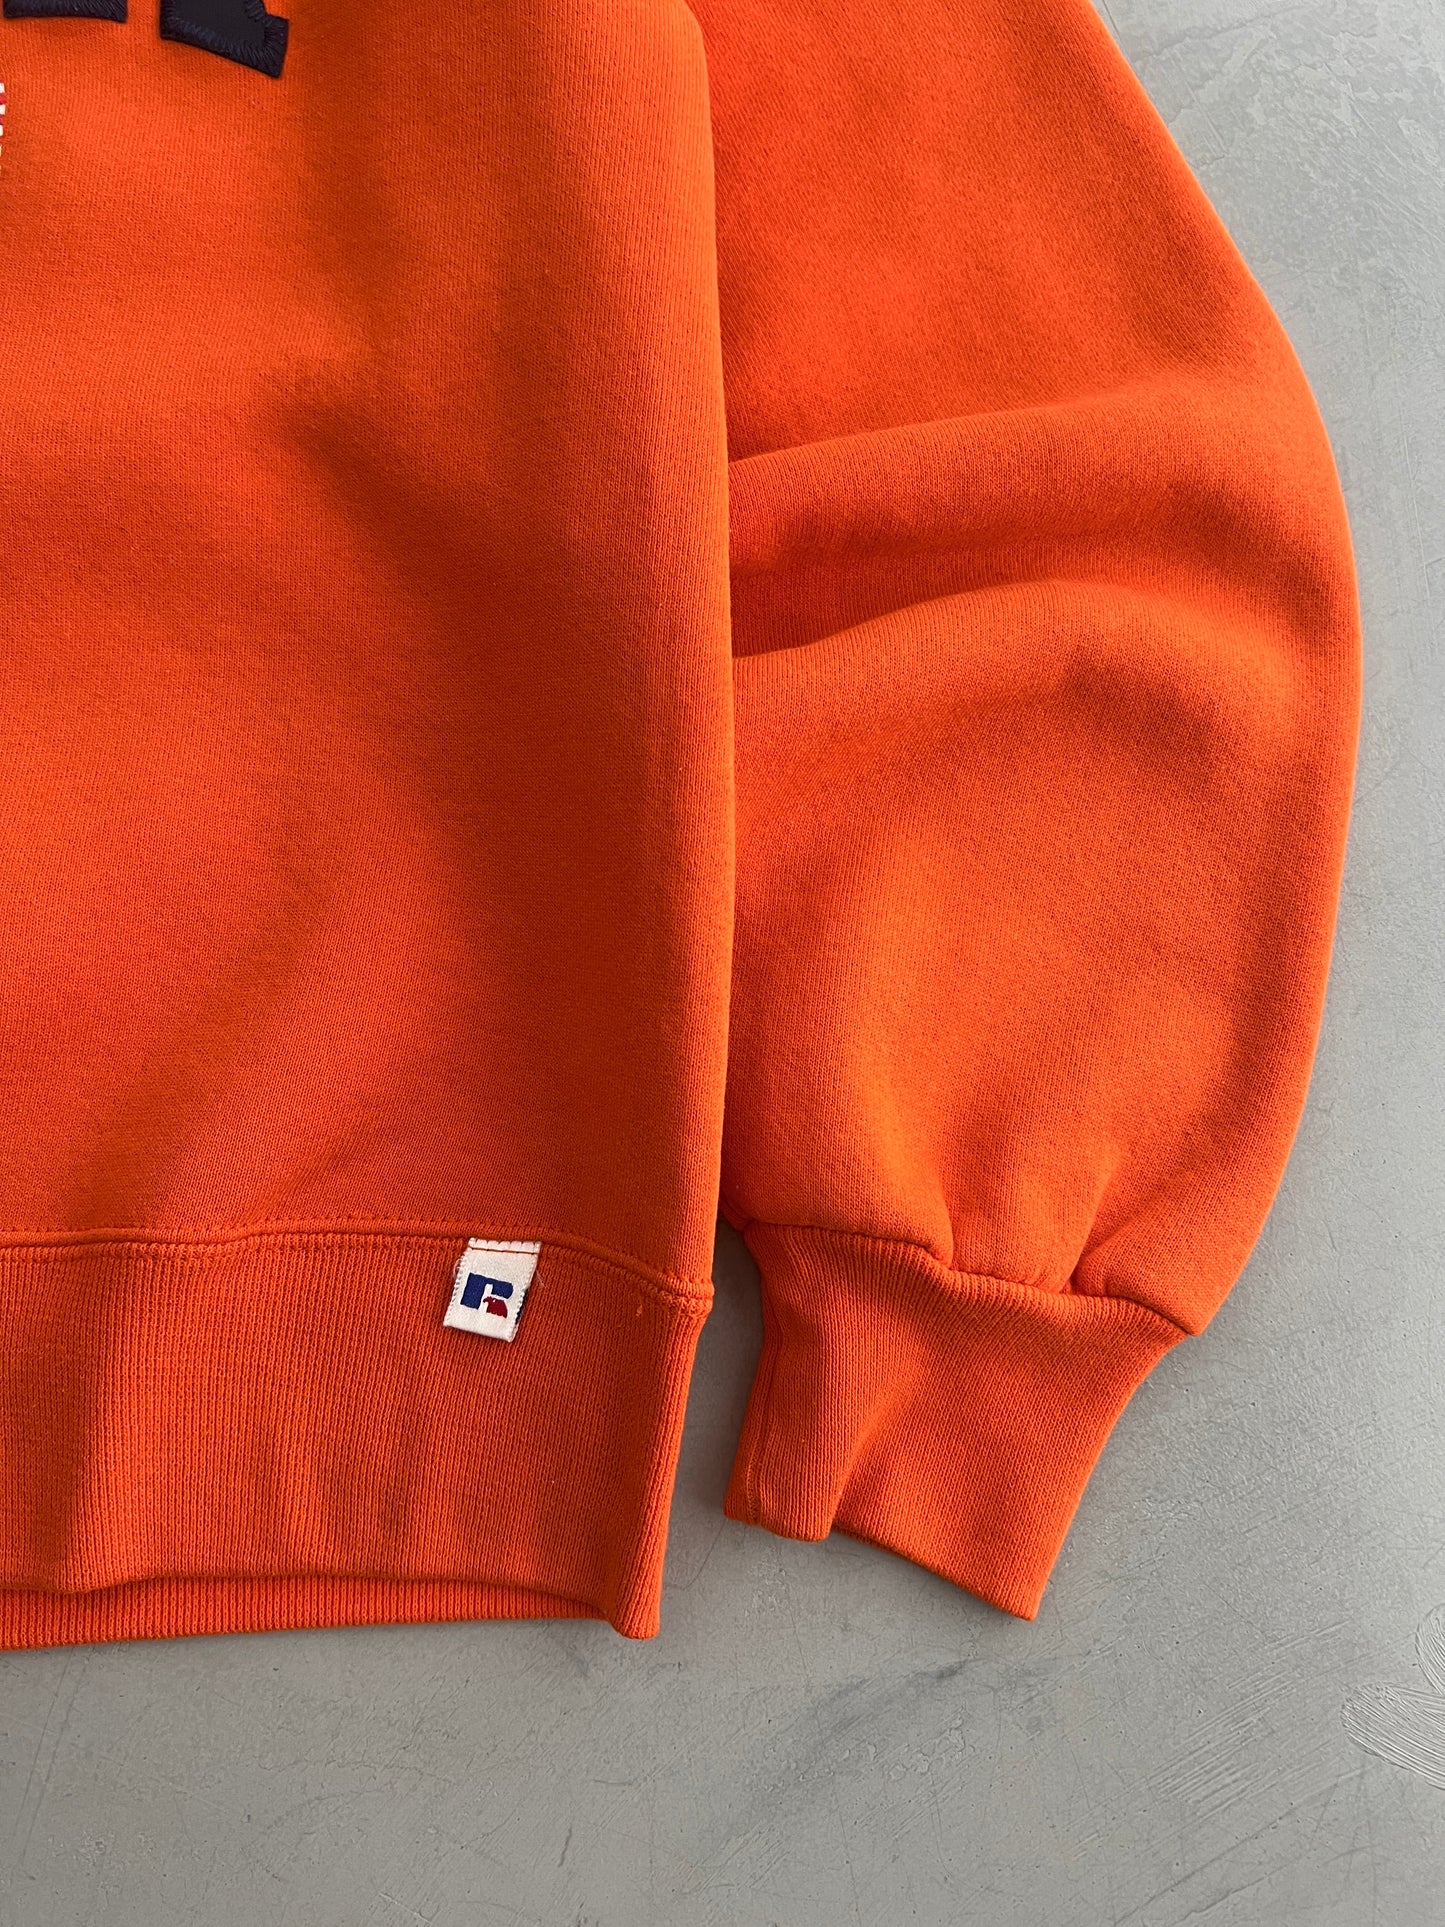 Made In USA Russel Athletic Sweatshirt [M]